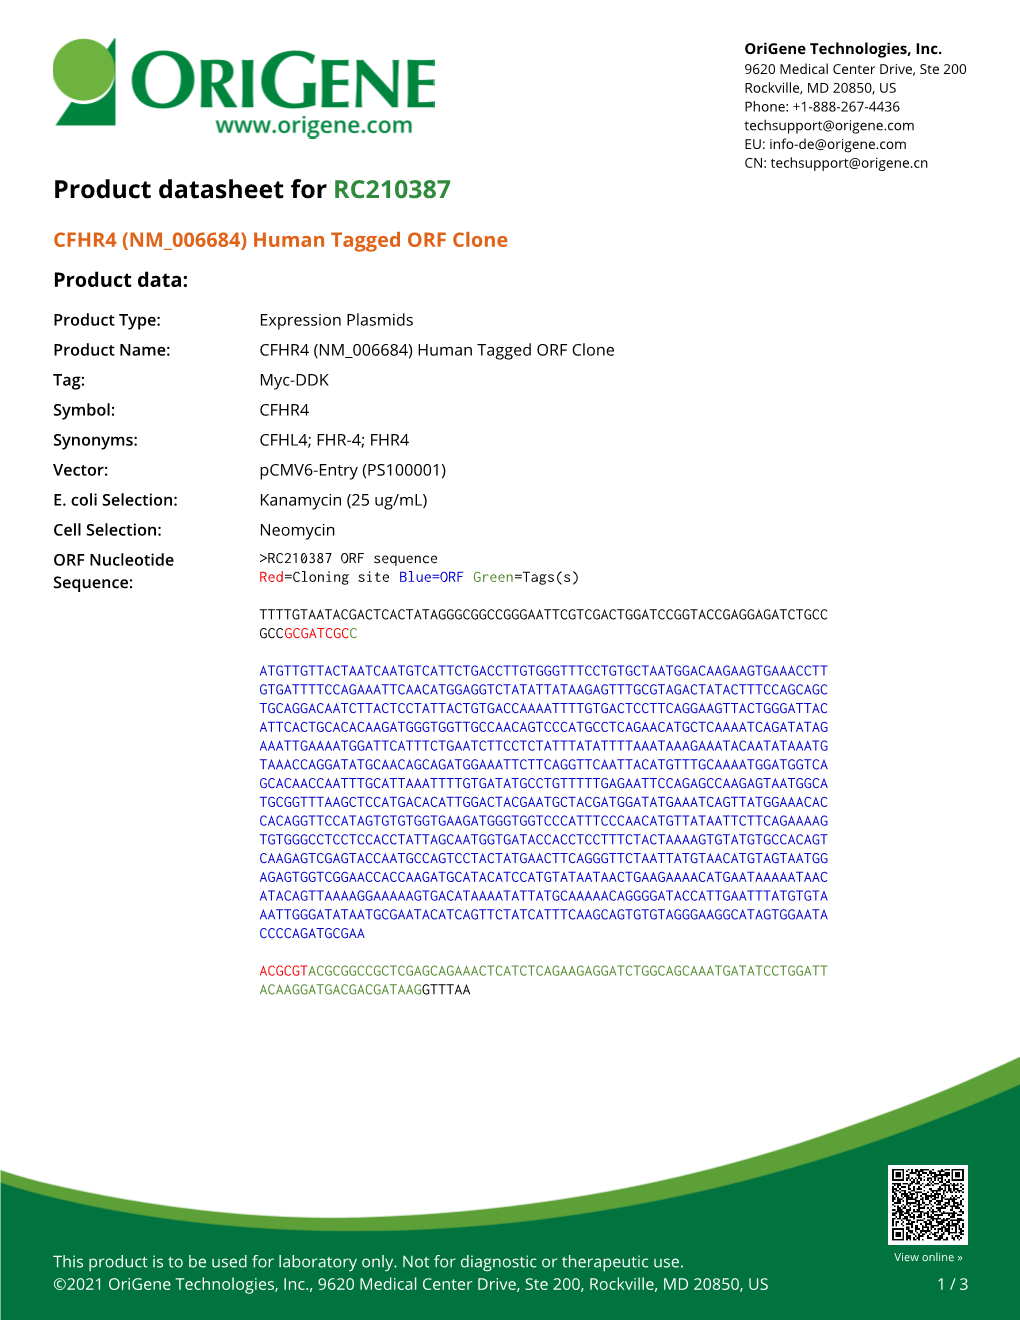 CFHR4 (NM 006684) Human Tagged ORF Clone Product Data